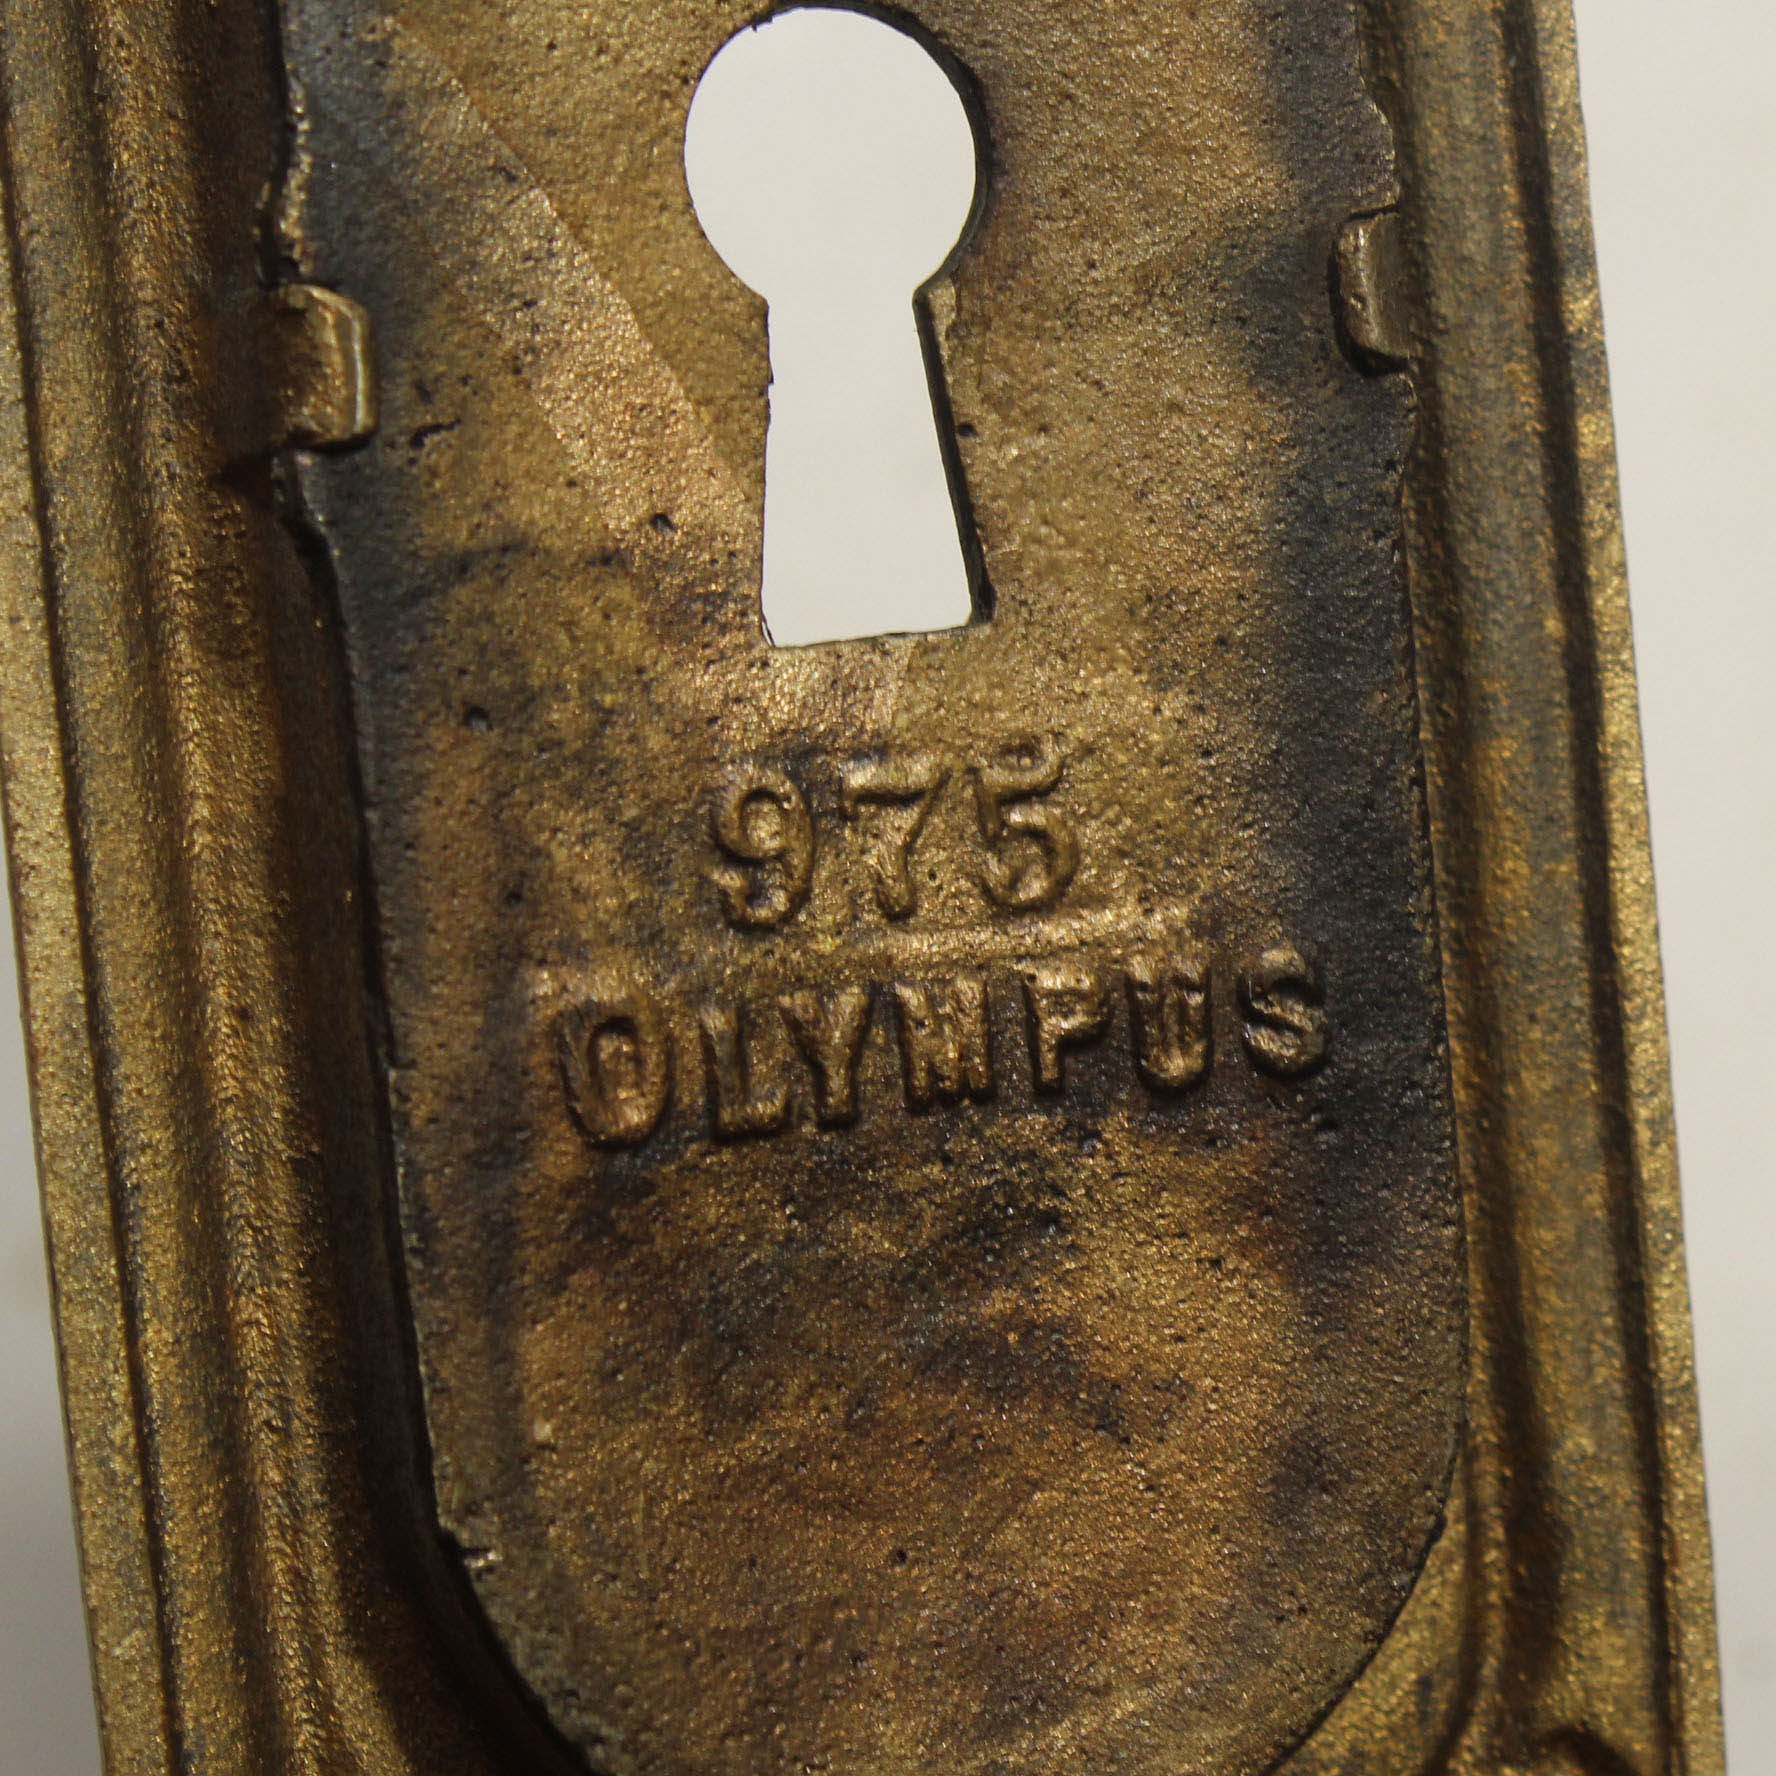 Complete Antique Brass “Olympus” Pocket Door Hardware Set by Russell & Erwin-67836